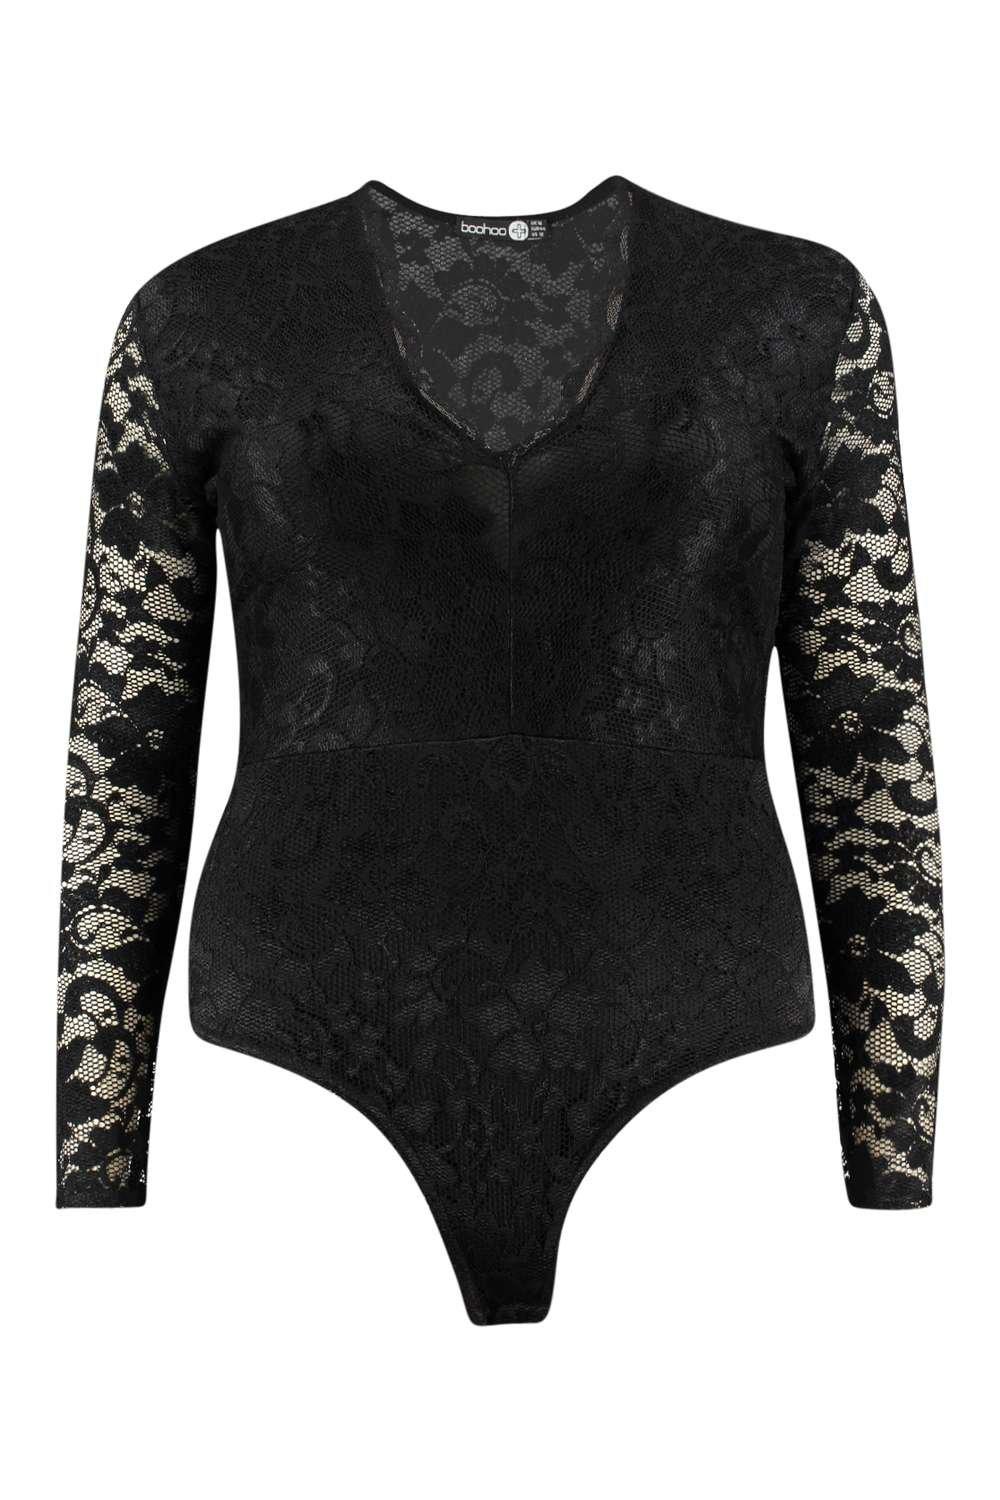 Boohoo Womens Plus Molly Lace Long Sleeved Bodysuit